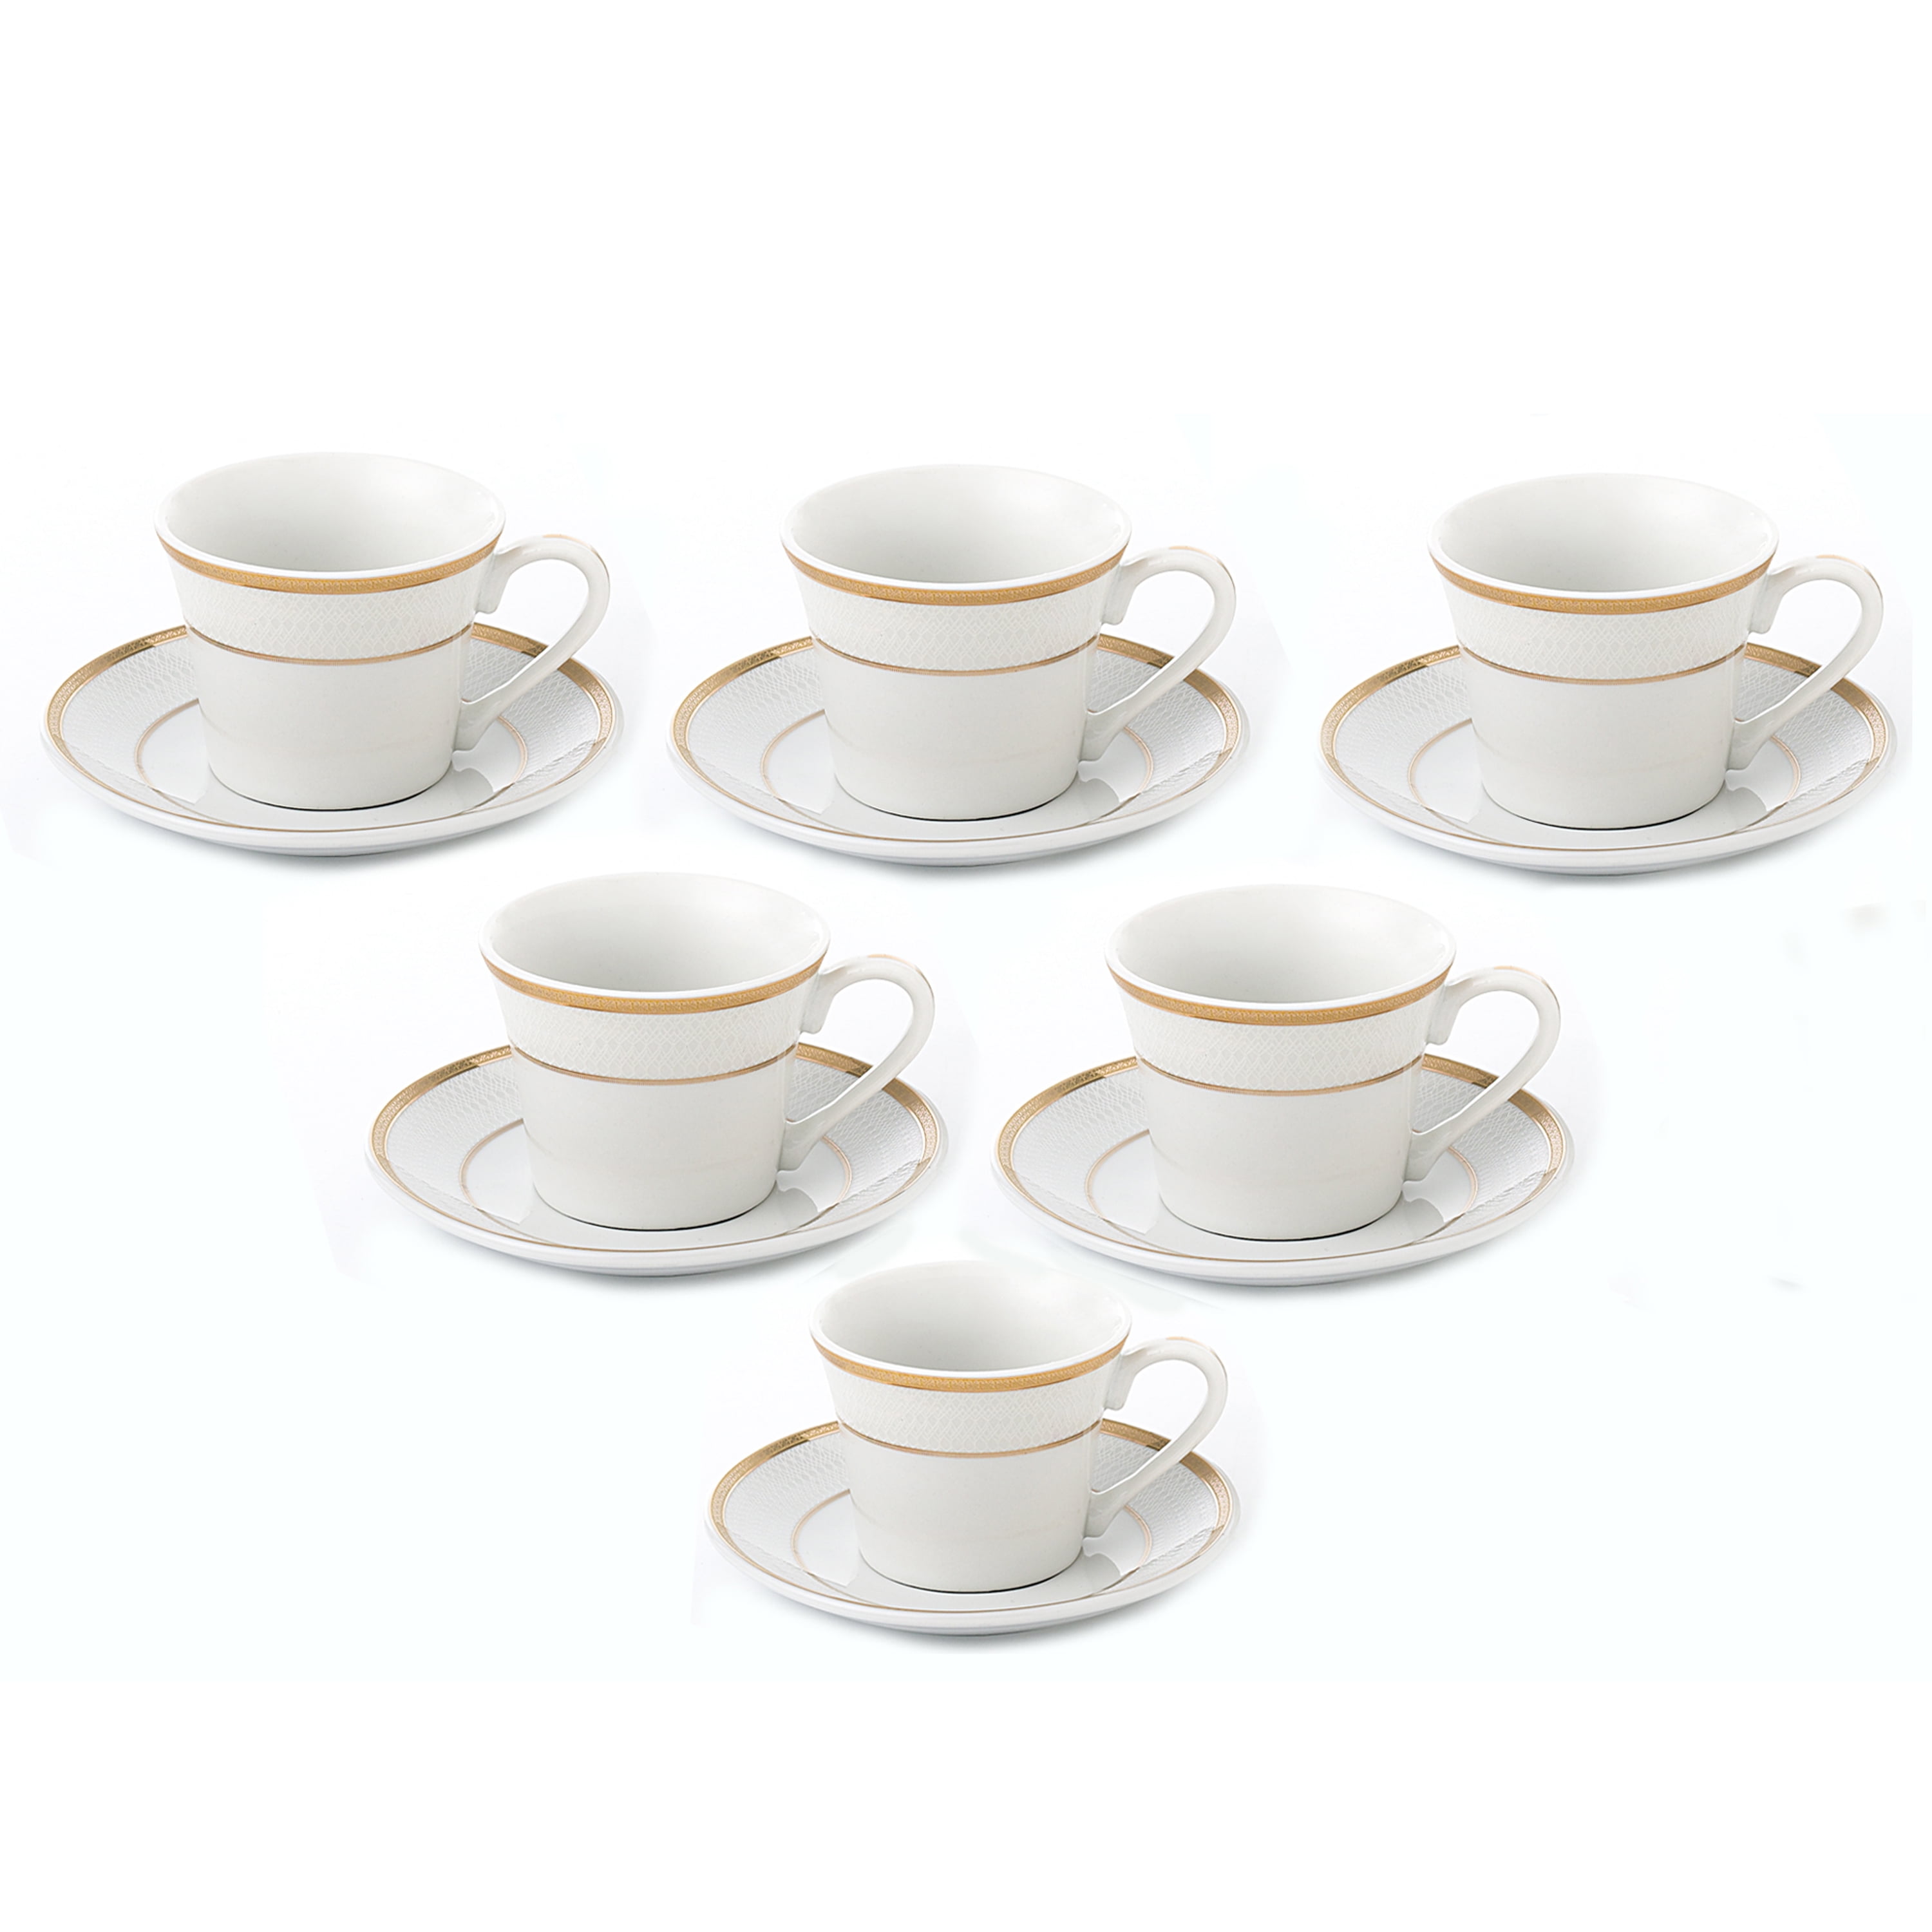 ceramic Tableware white with Gold Decor Strips Porcelain Quality Set of 6 Espresso Coffee Cups with Saucer 